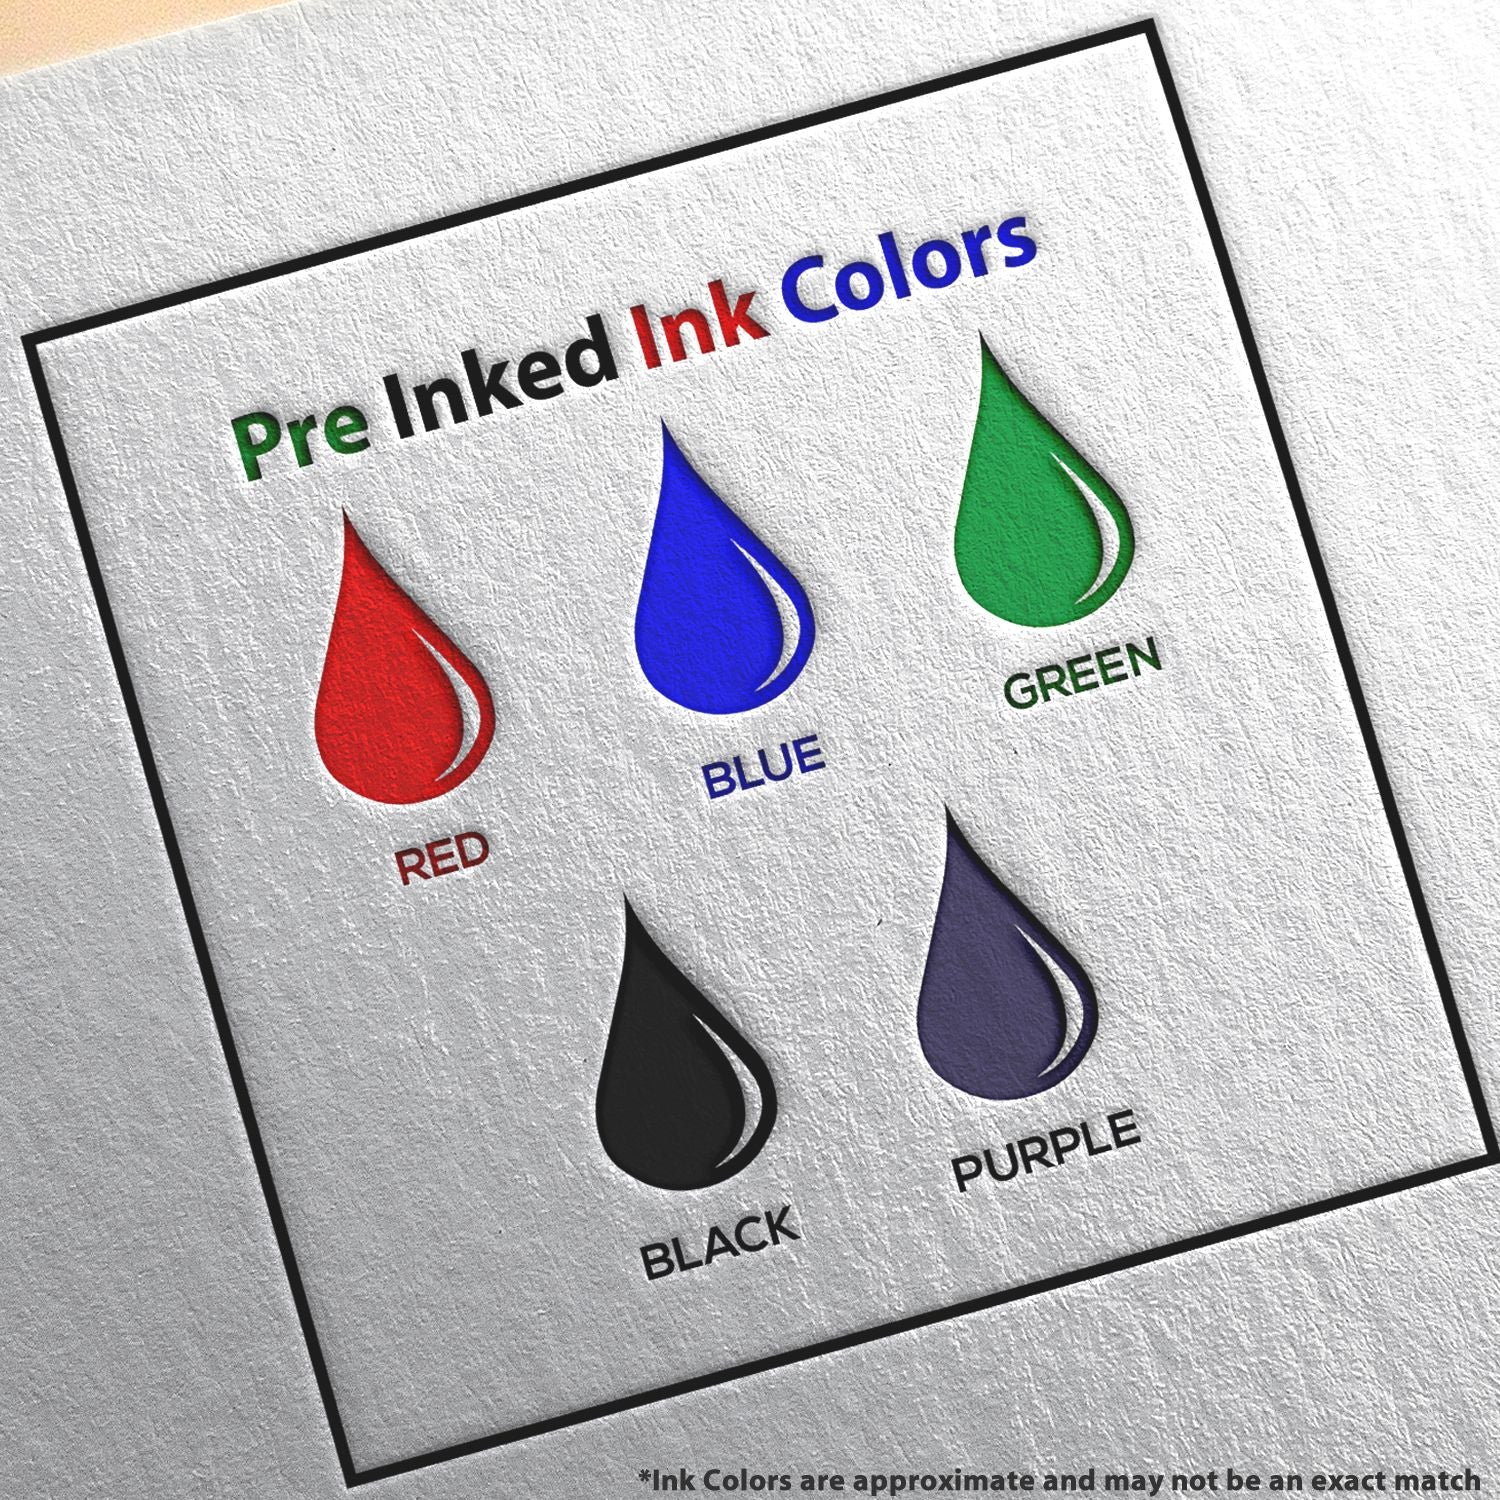 A picture showing the different ink colors or hues available for the Premium MaxLight Pre-Inked Wisconsin Engineering Stamp product.